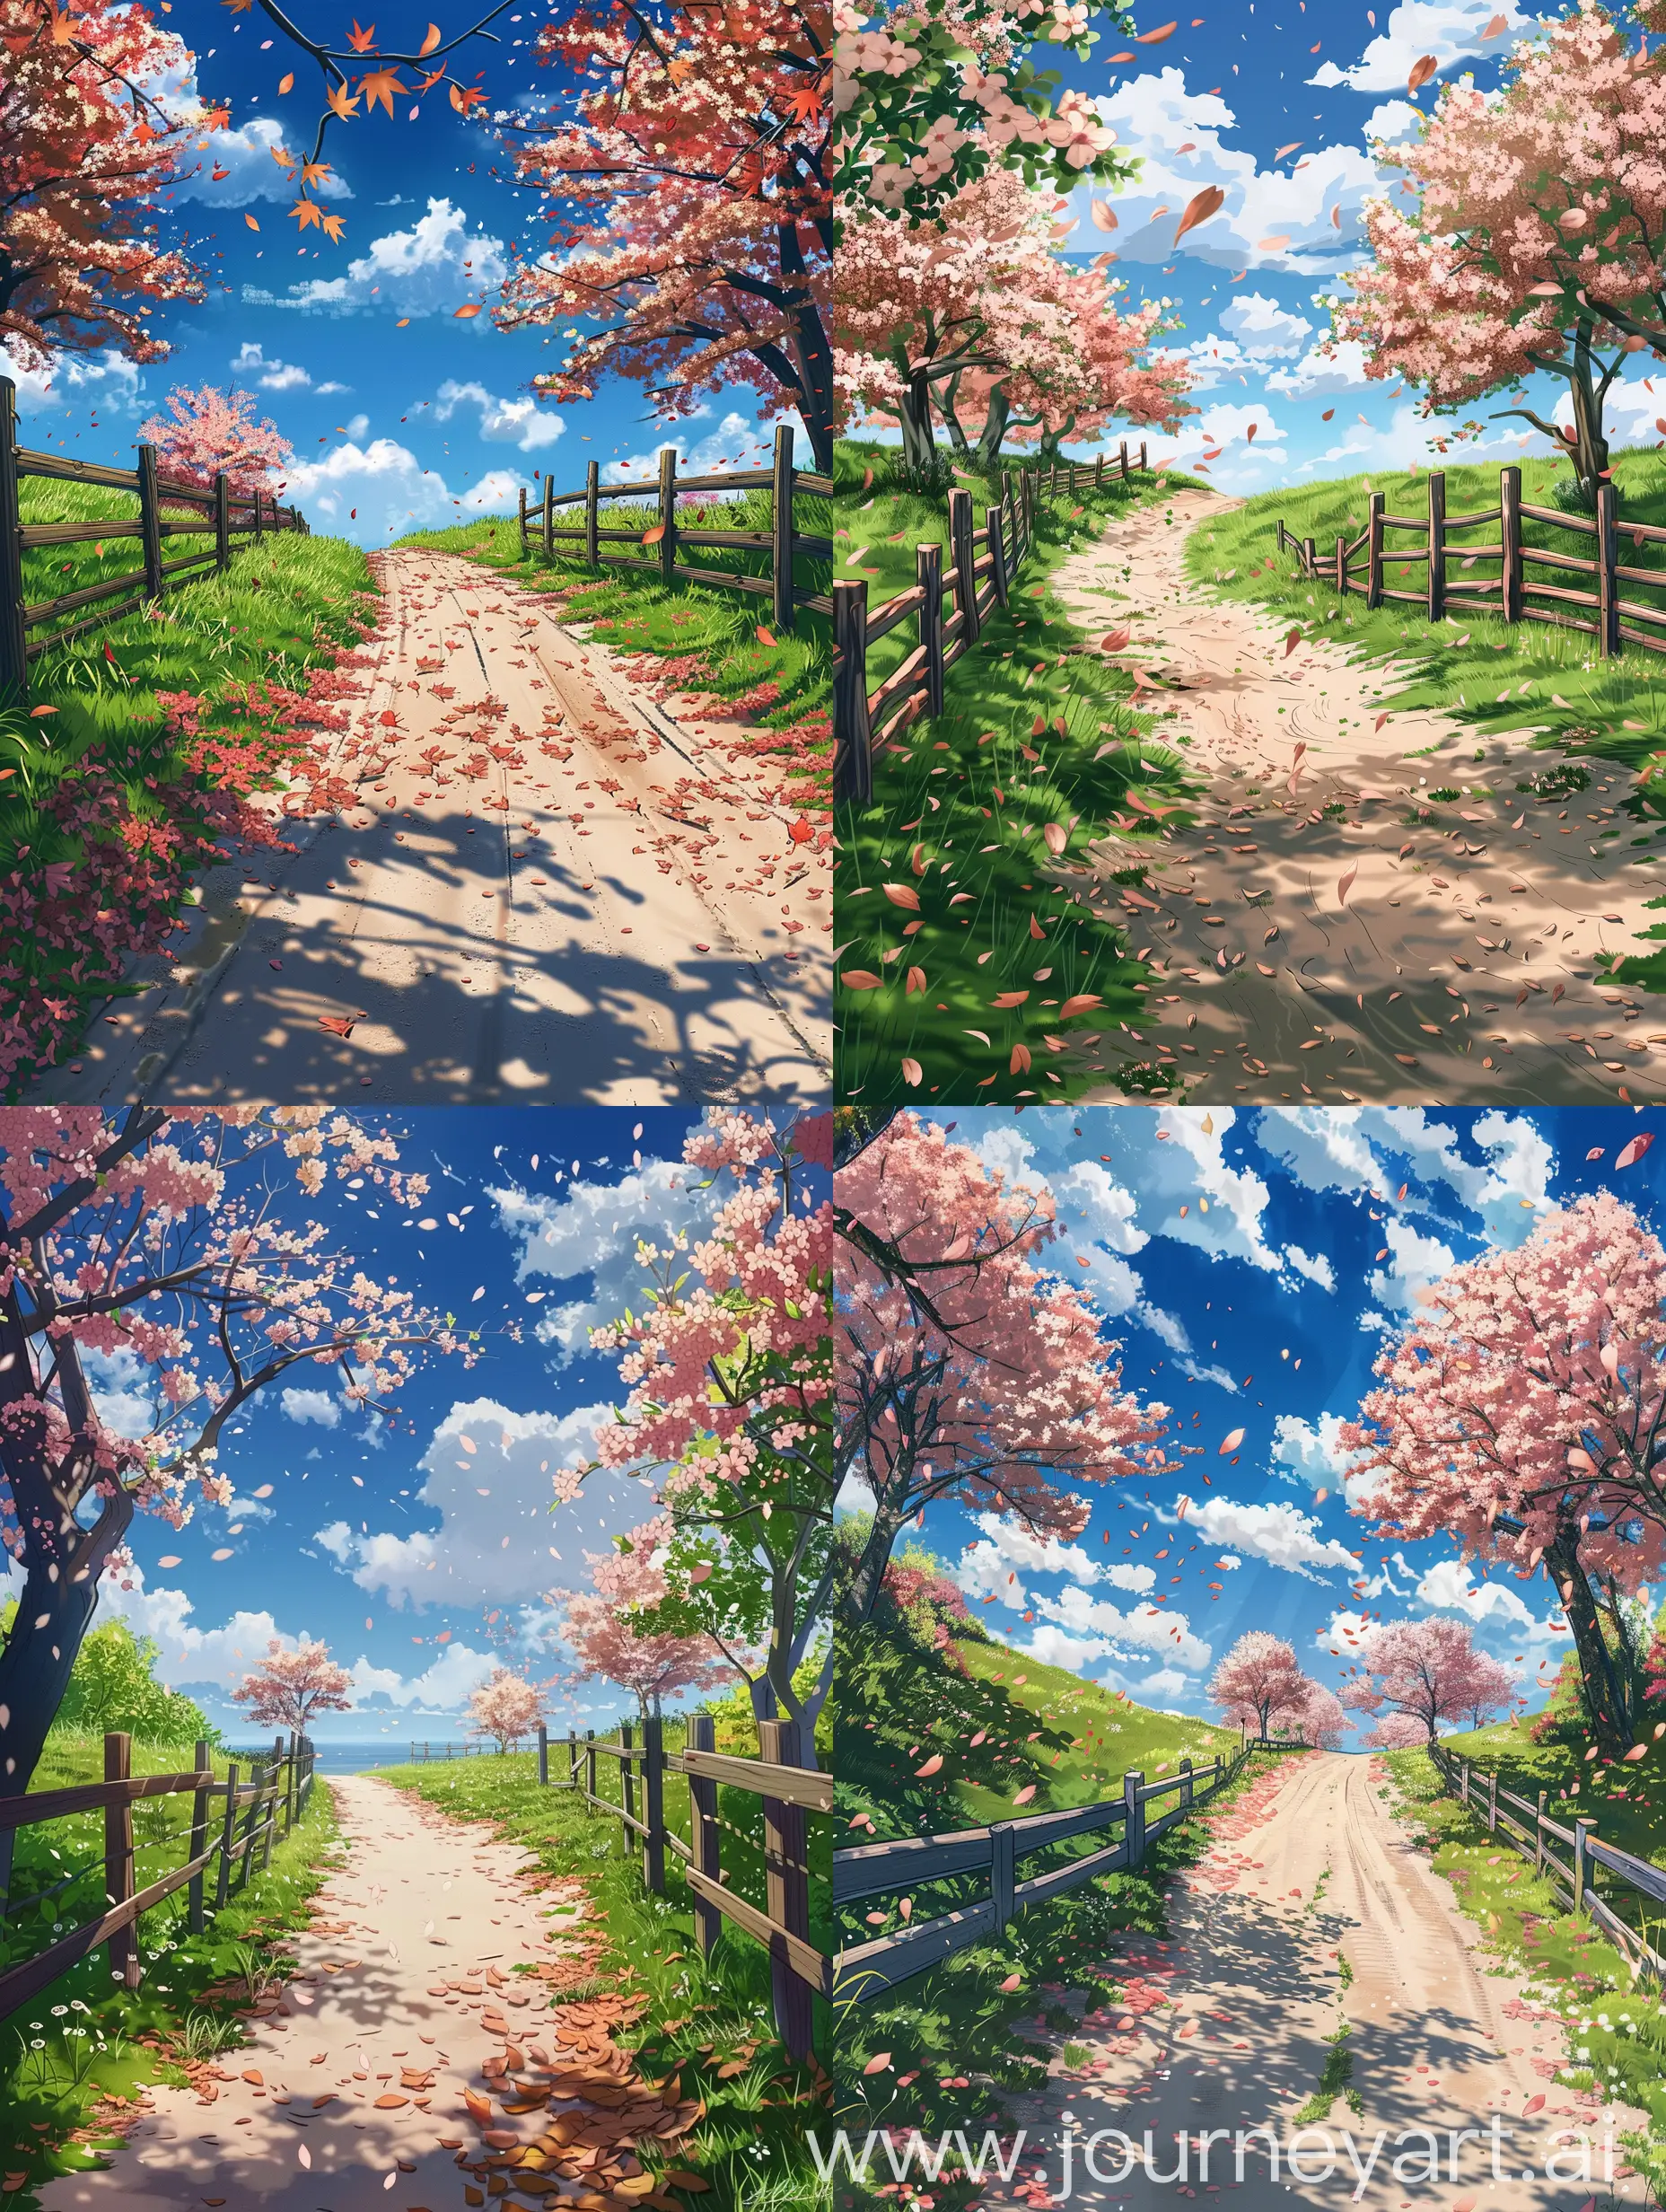 In the countryside, there is a narrow road between the grass, the sandy road is surrounded by two wooden fences, and the leaves of the cherry trees fall on that road.  There are a few cherry trees beside the road, the grass is green, and there are some flowers.  Blue sky, white clouds. Anime style.